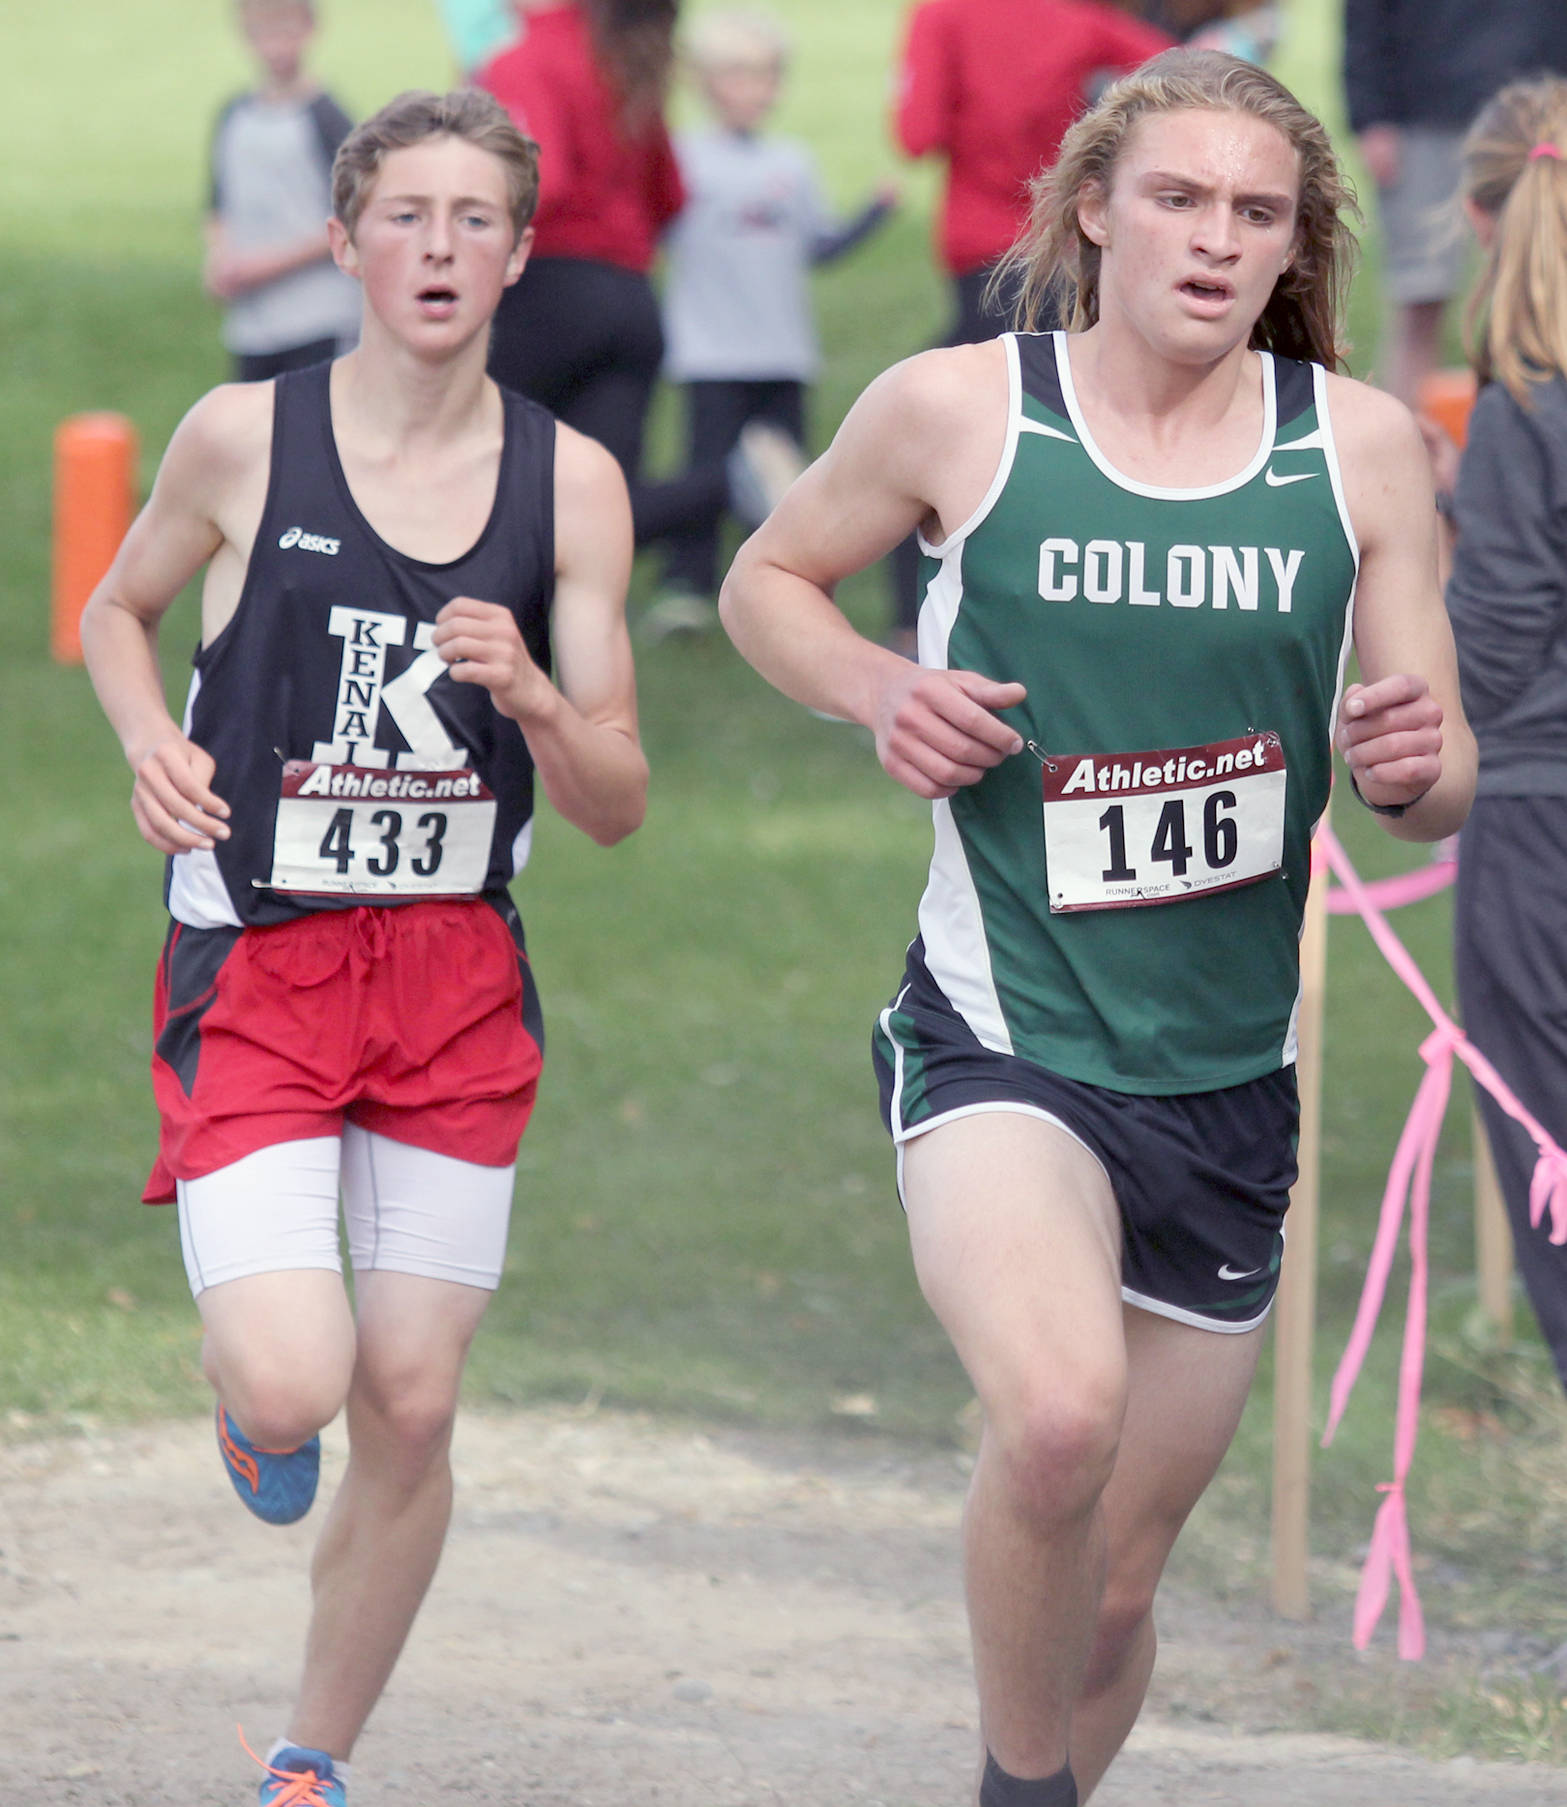 Colony’s Gavin Block runs just ahead of Kenai Central’s Maison Dunham during the boys varsity race of the Palmer Invitational on Saturday, Sept. 2, 2017, at Palmer High School. Dunham finished seventh and Block was 10th. (Photo by Jeremiah Bartz/Frontiersman)